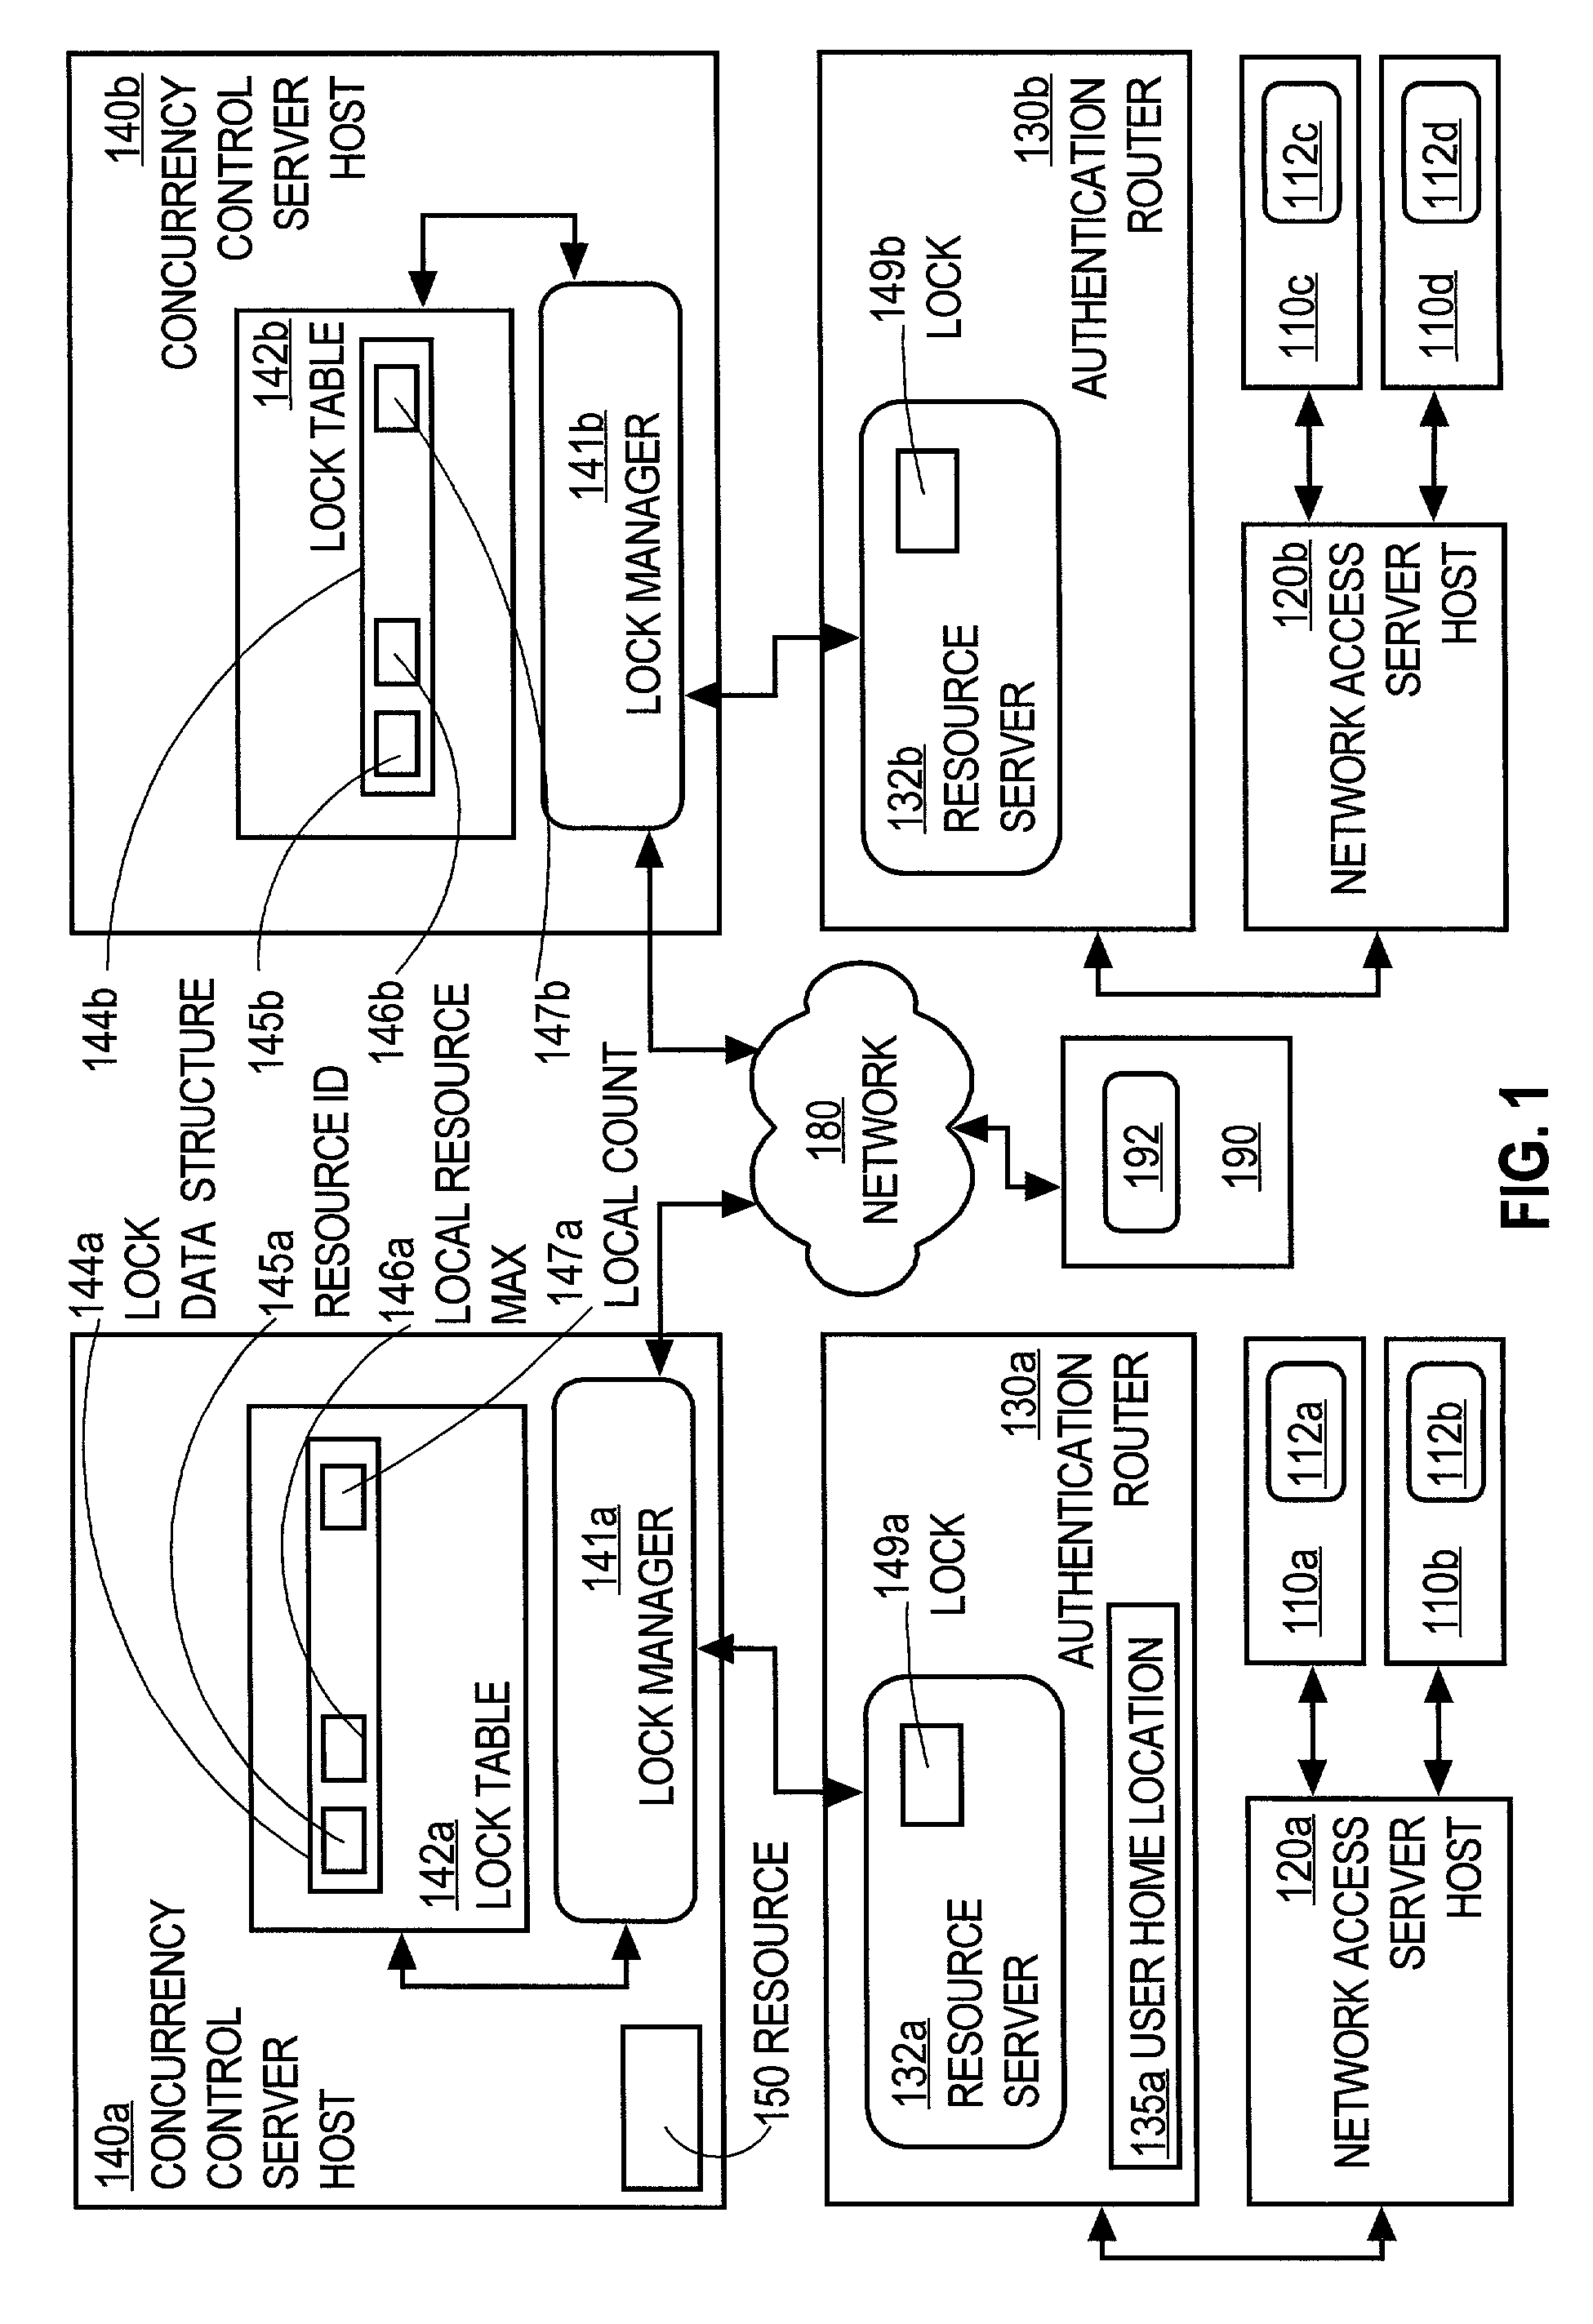 Controlling access of concurrent users of computer resources in a distributed system using an improved semaphore counting approach